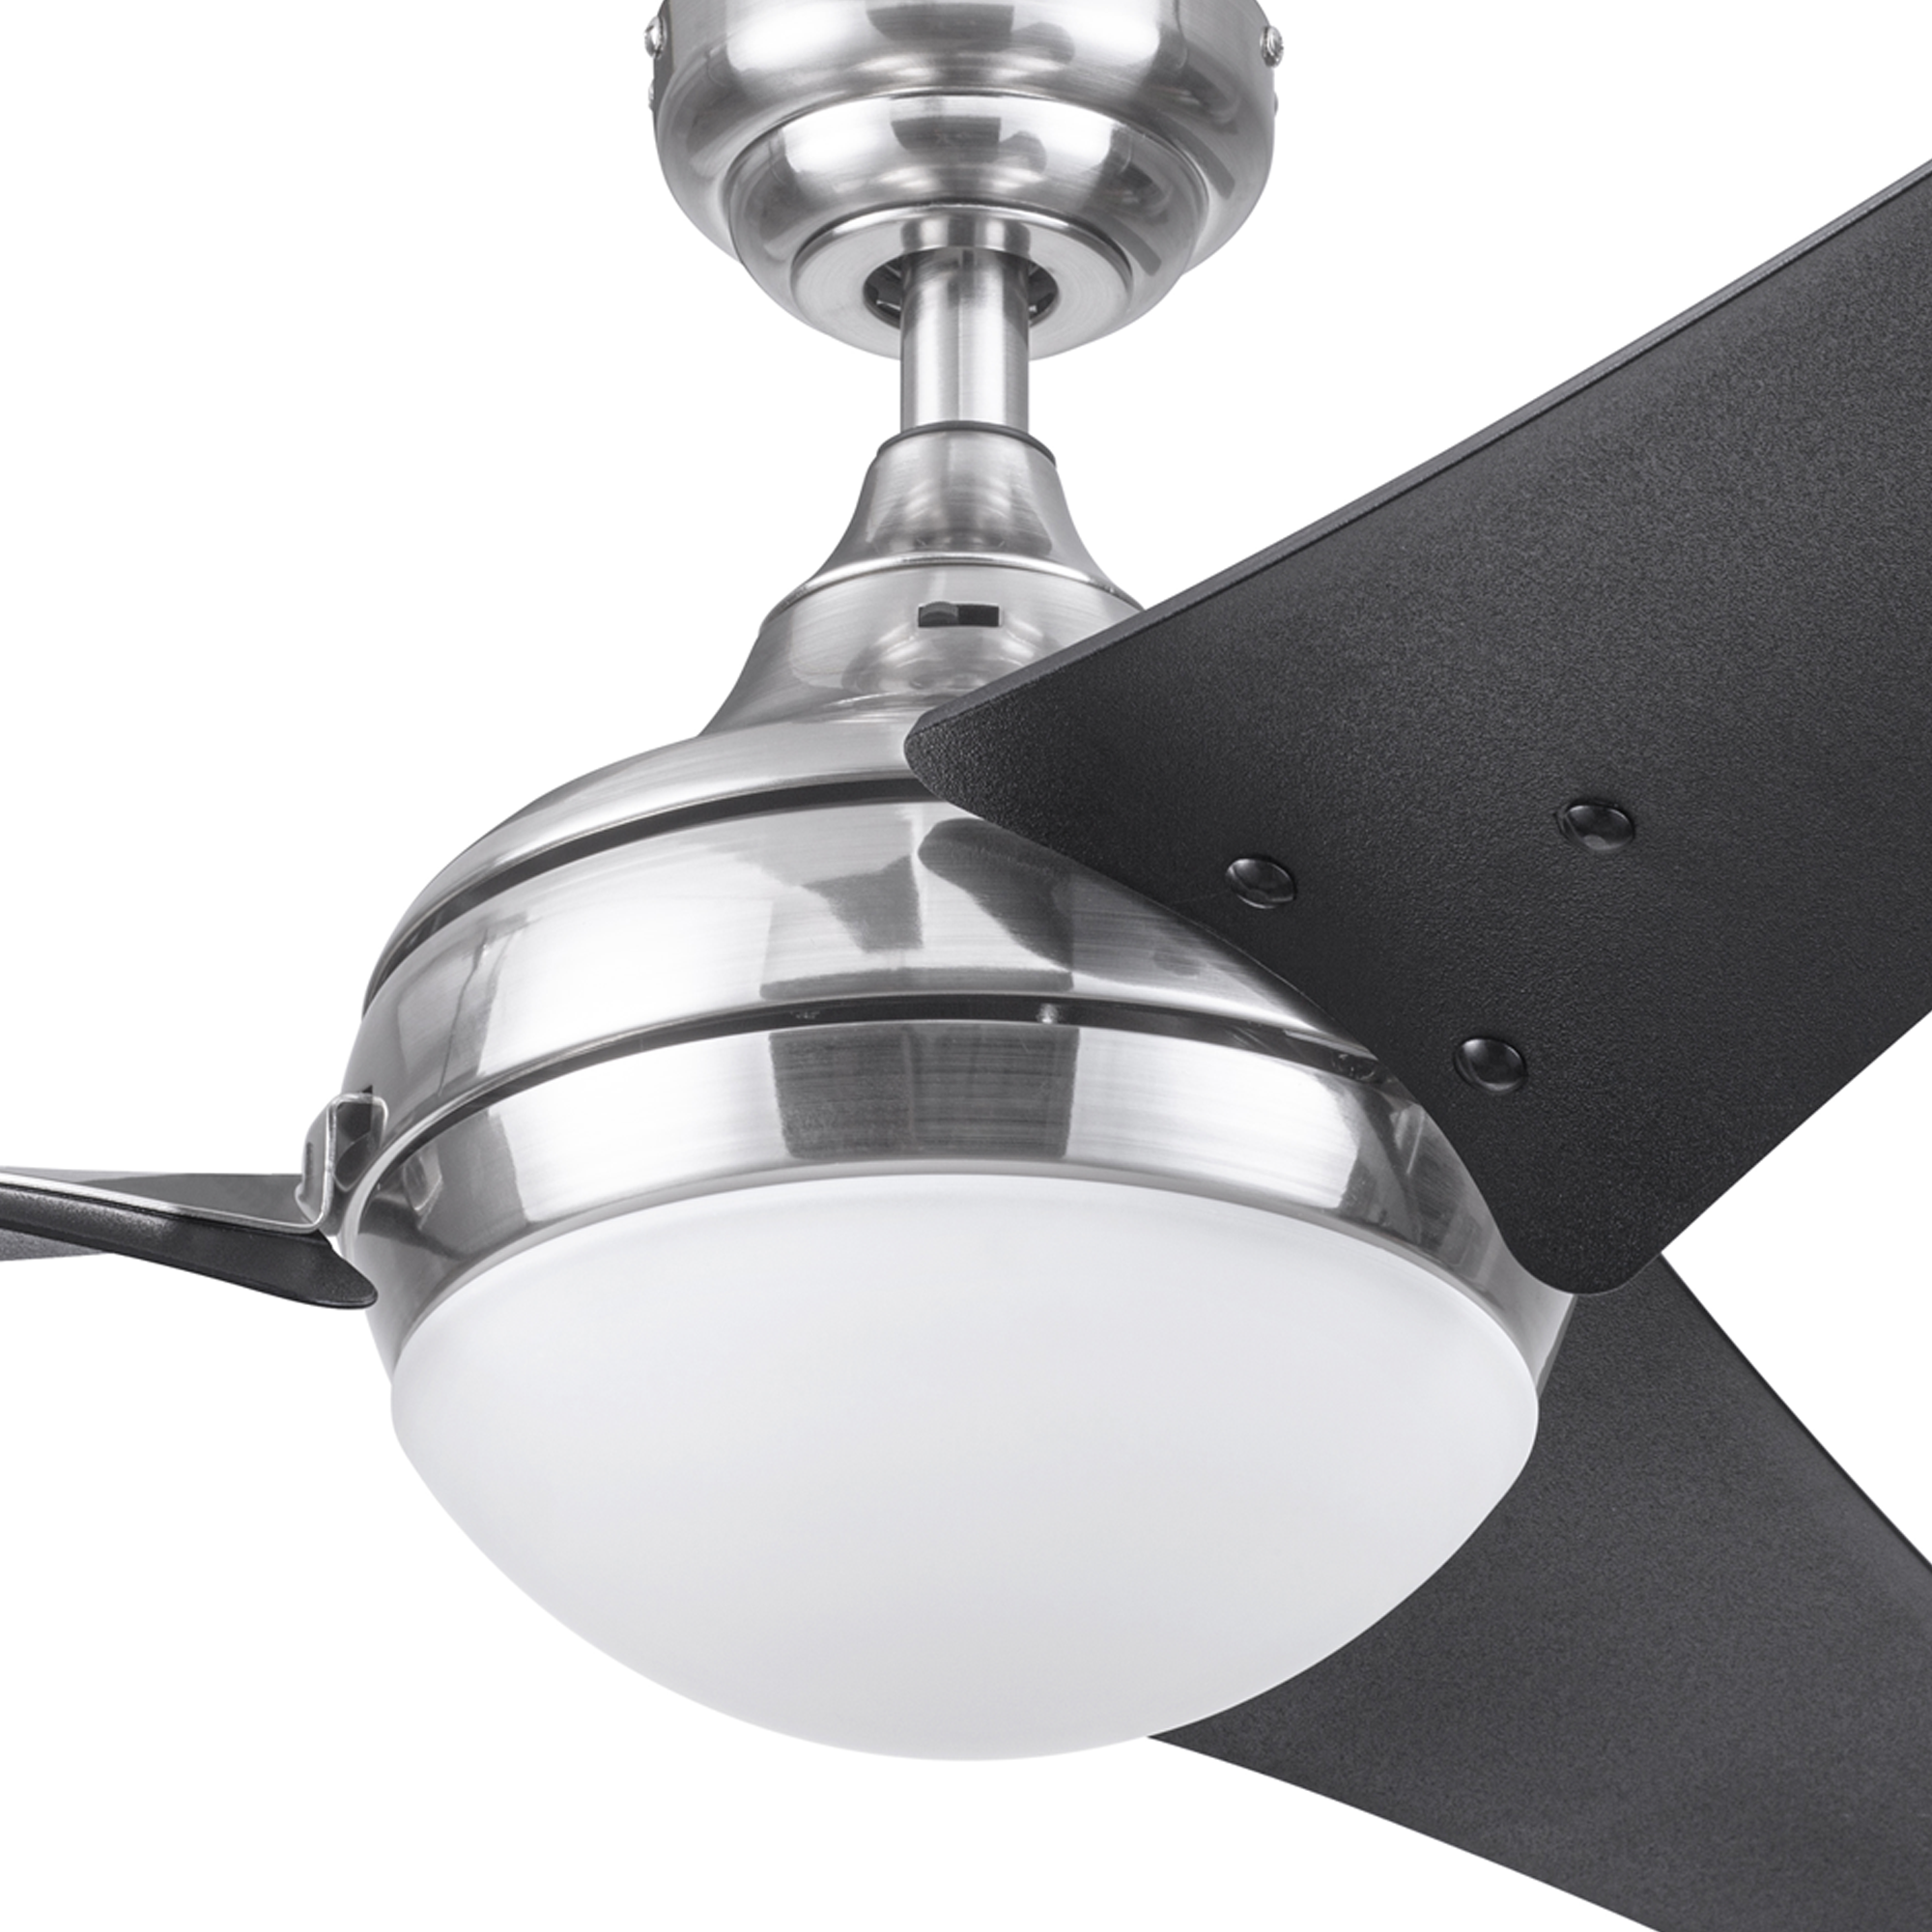 52 Inch Maxon, Satin Nickel, Remote Control, Ceiling Fan by Prominence Home